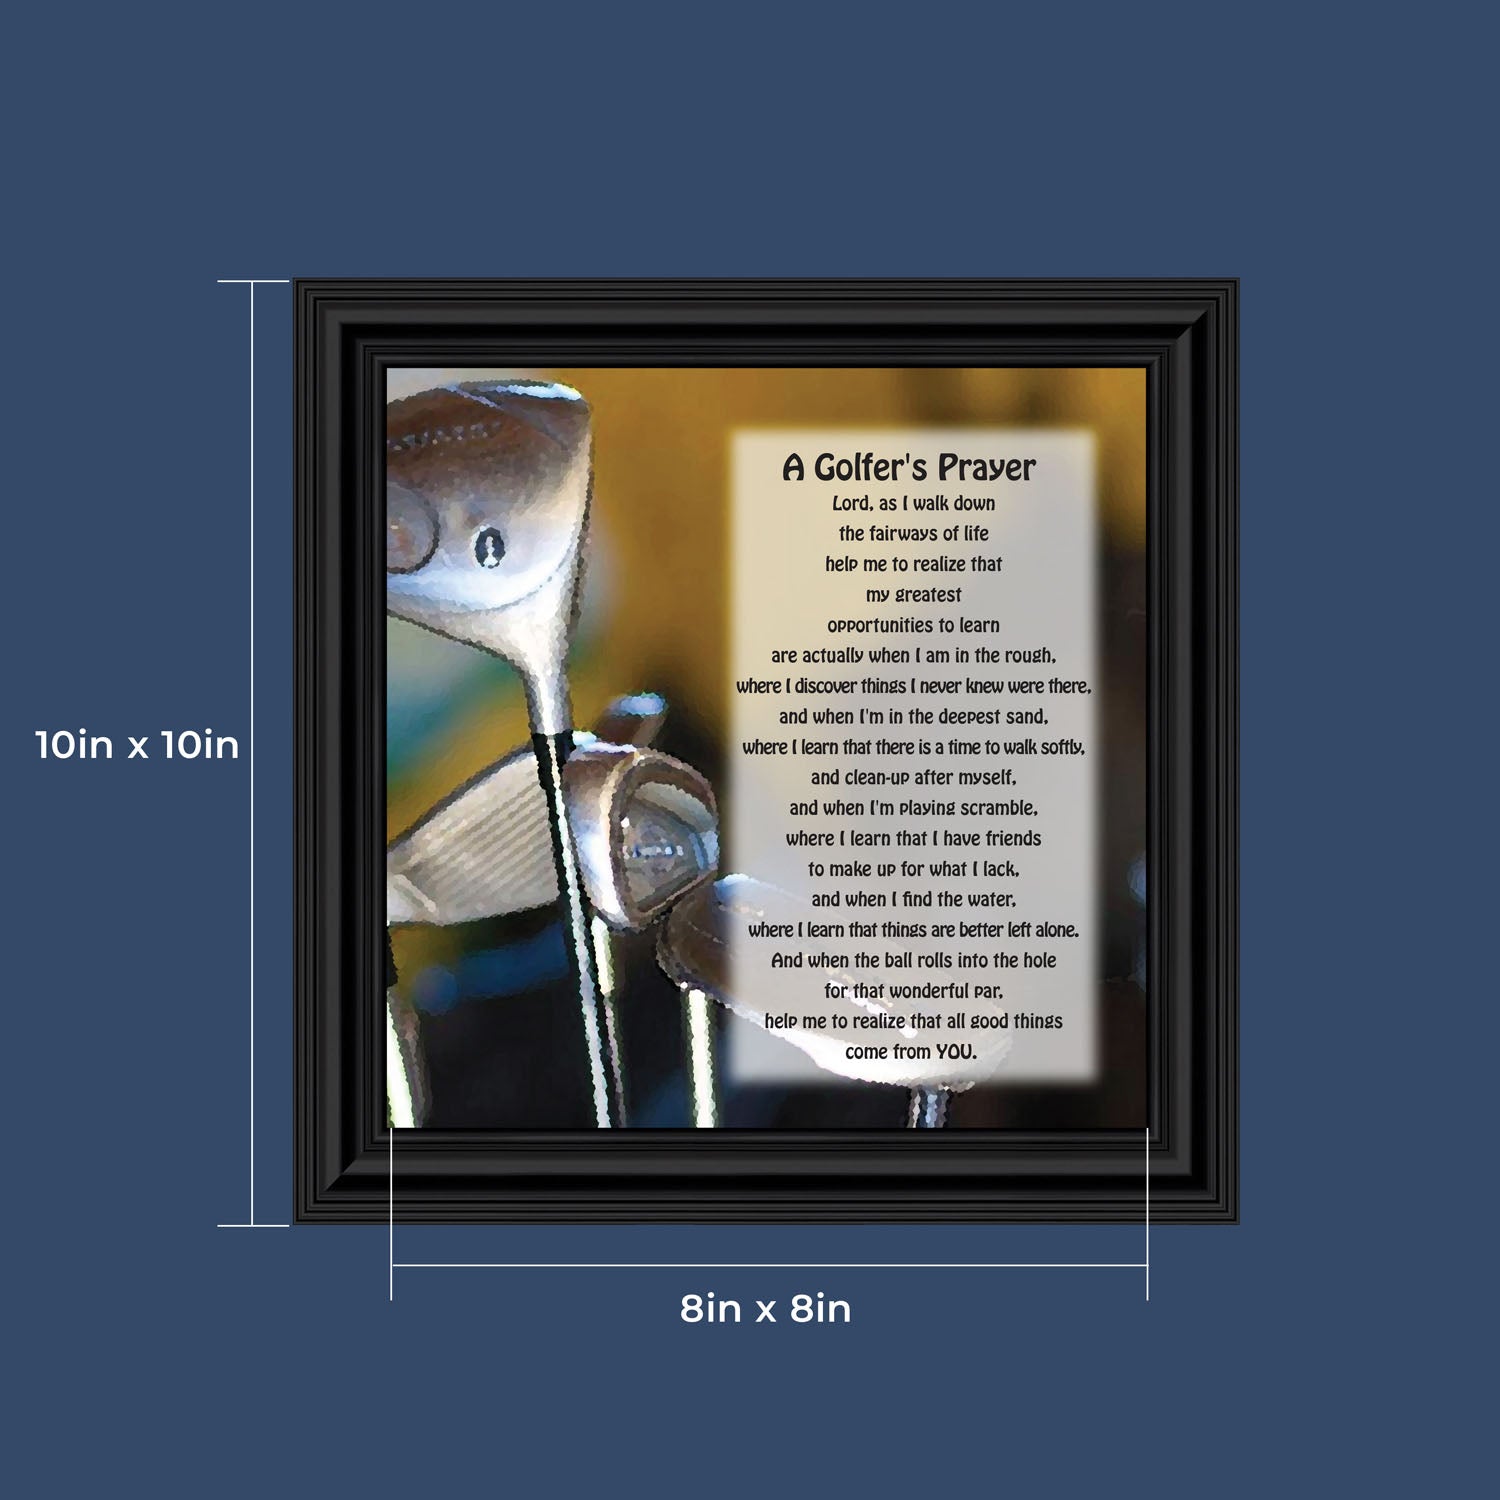 Golf, Funny Golf Gifts for Men Picture Frame 10X10 6355 – Crossroads Home  Decor